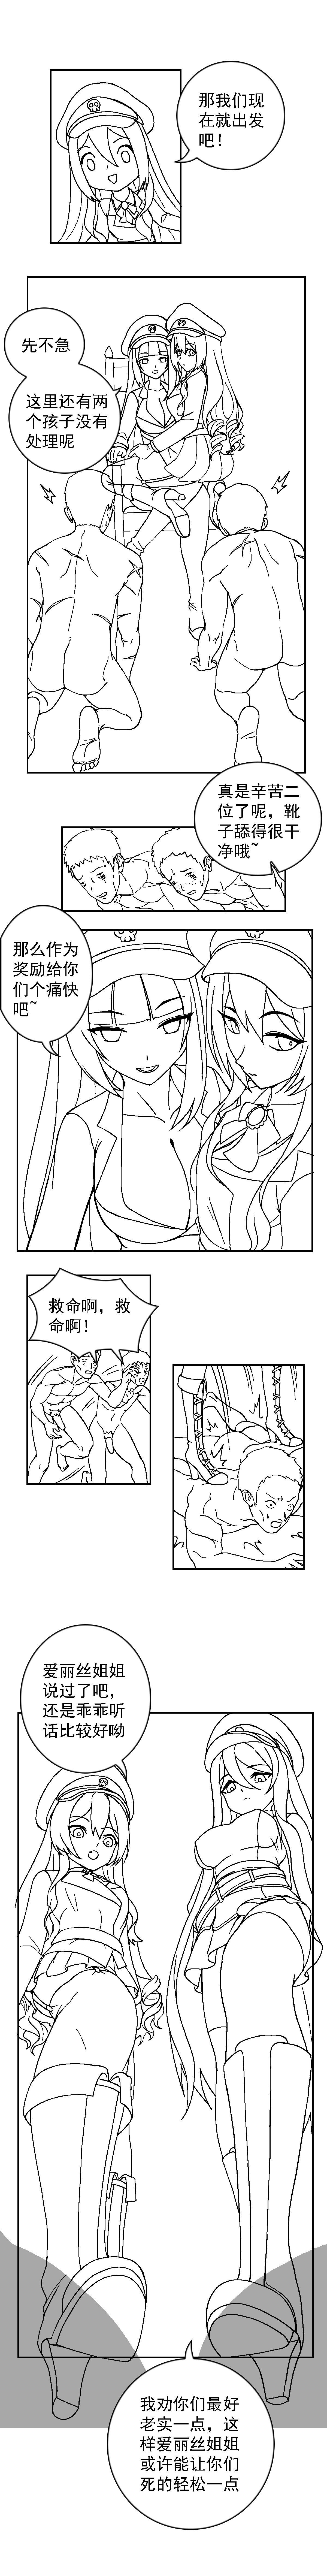 Ano [Weixiefashi] The Cruel Empire Executioners black-and-white [帝国处刑官爱丽丝2：残酷的处刑天使][黑白] Hugetits - Page 5